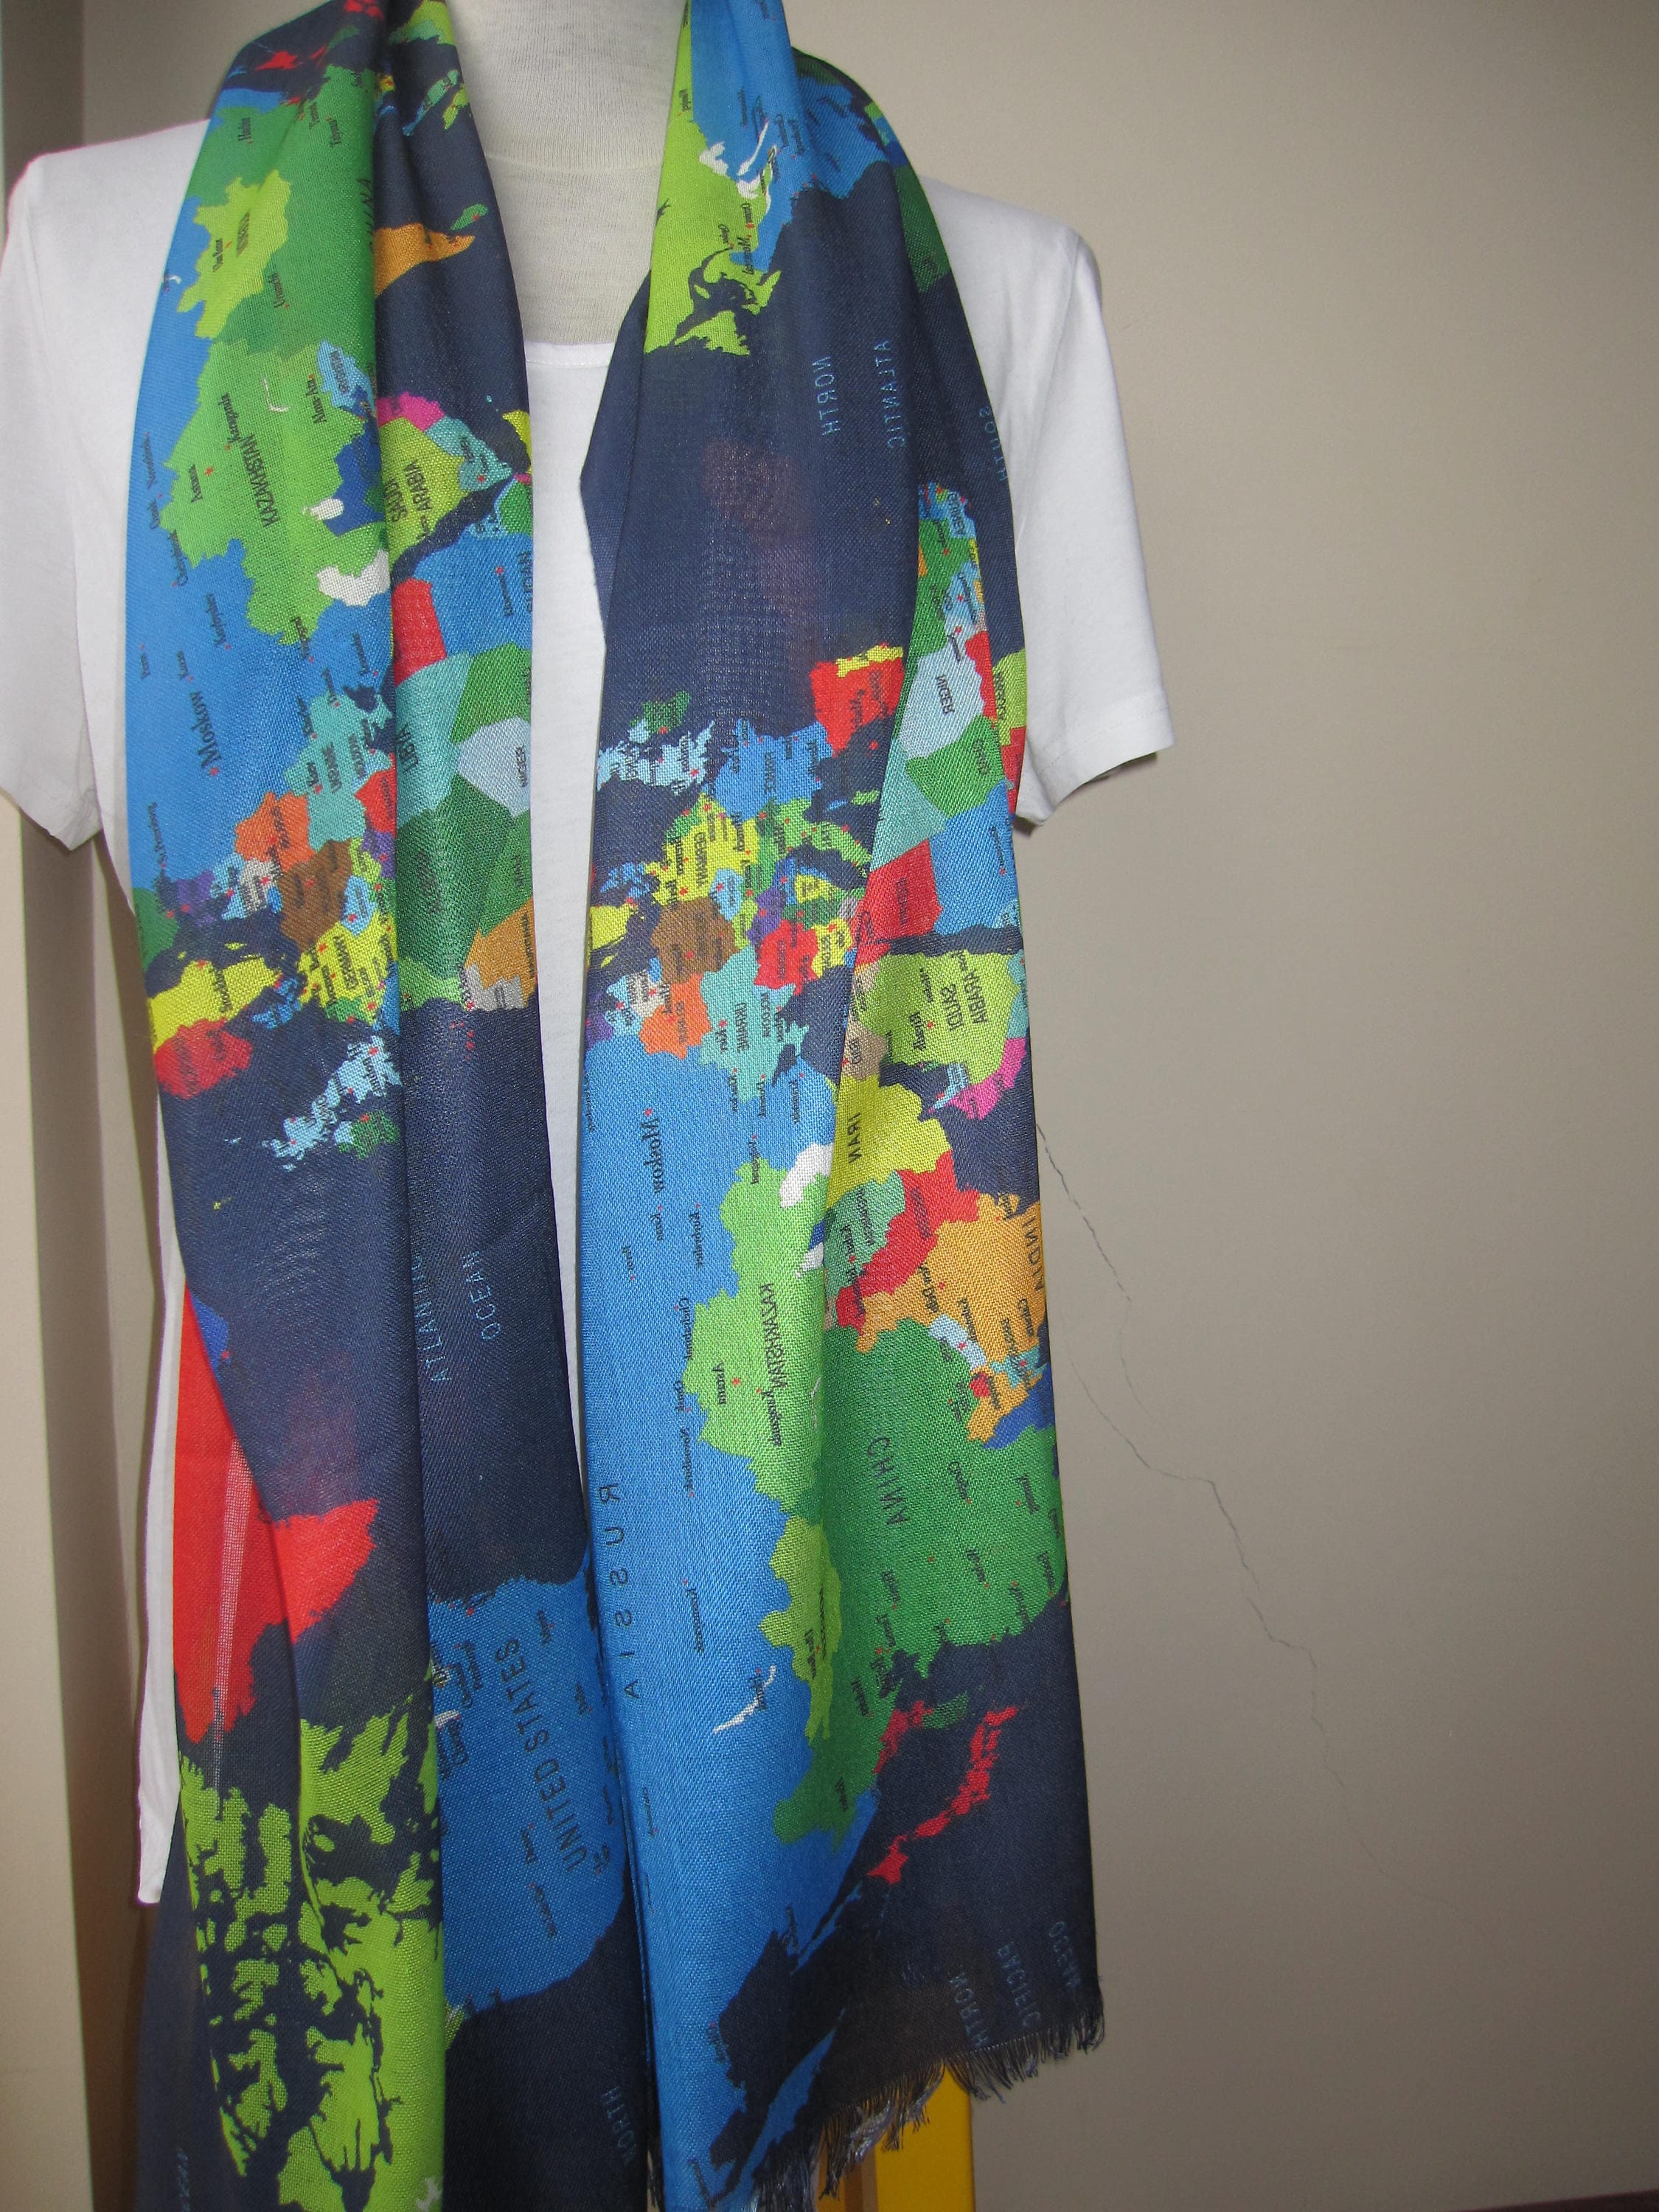 Accessories, Lg World Map Scarf